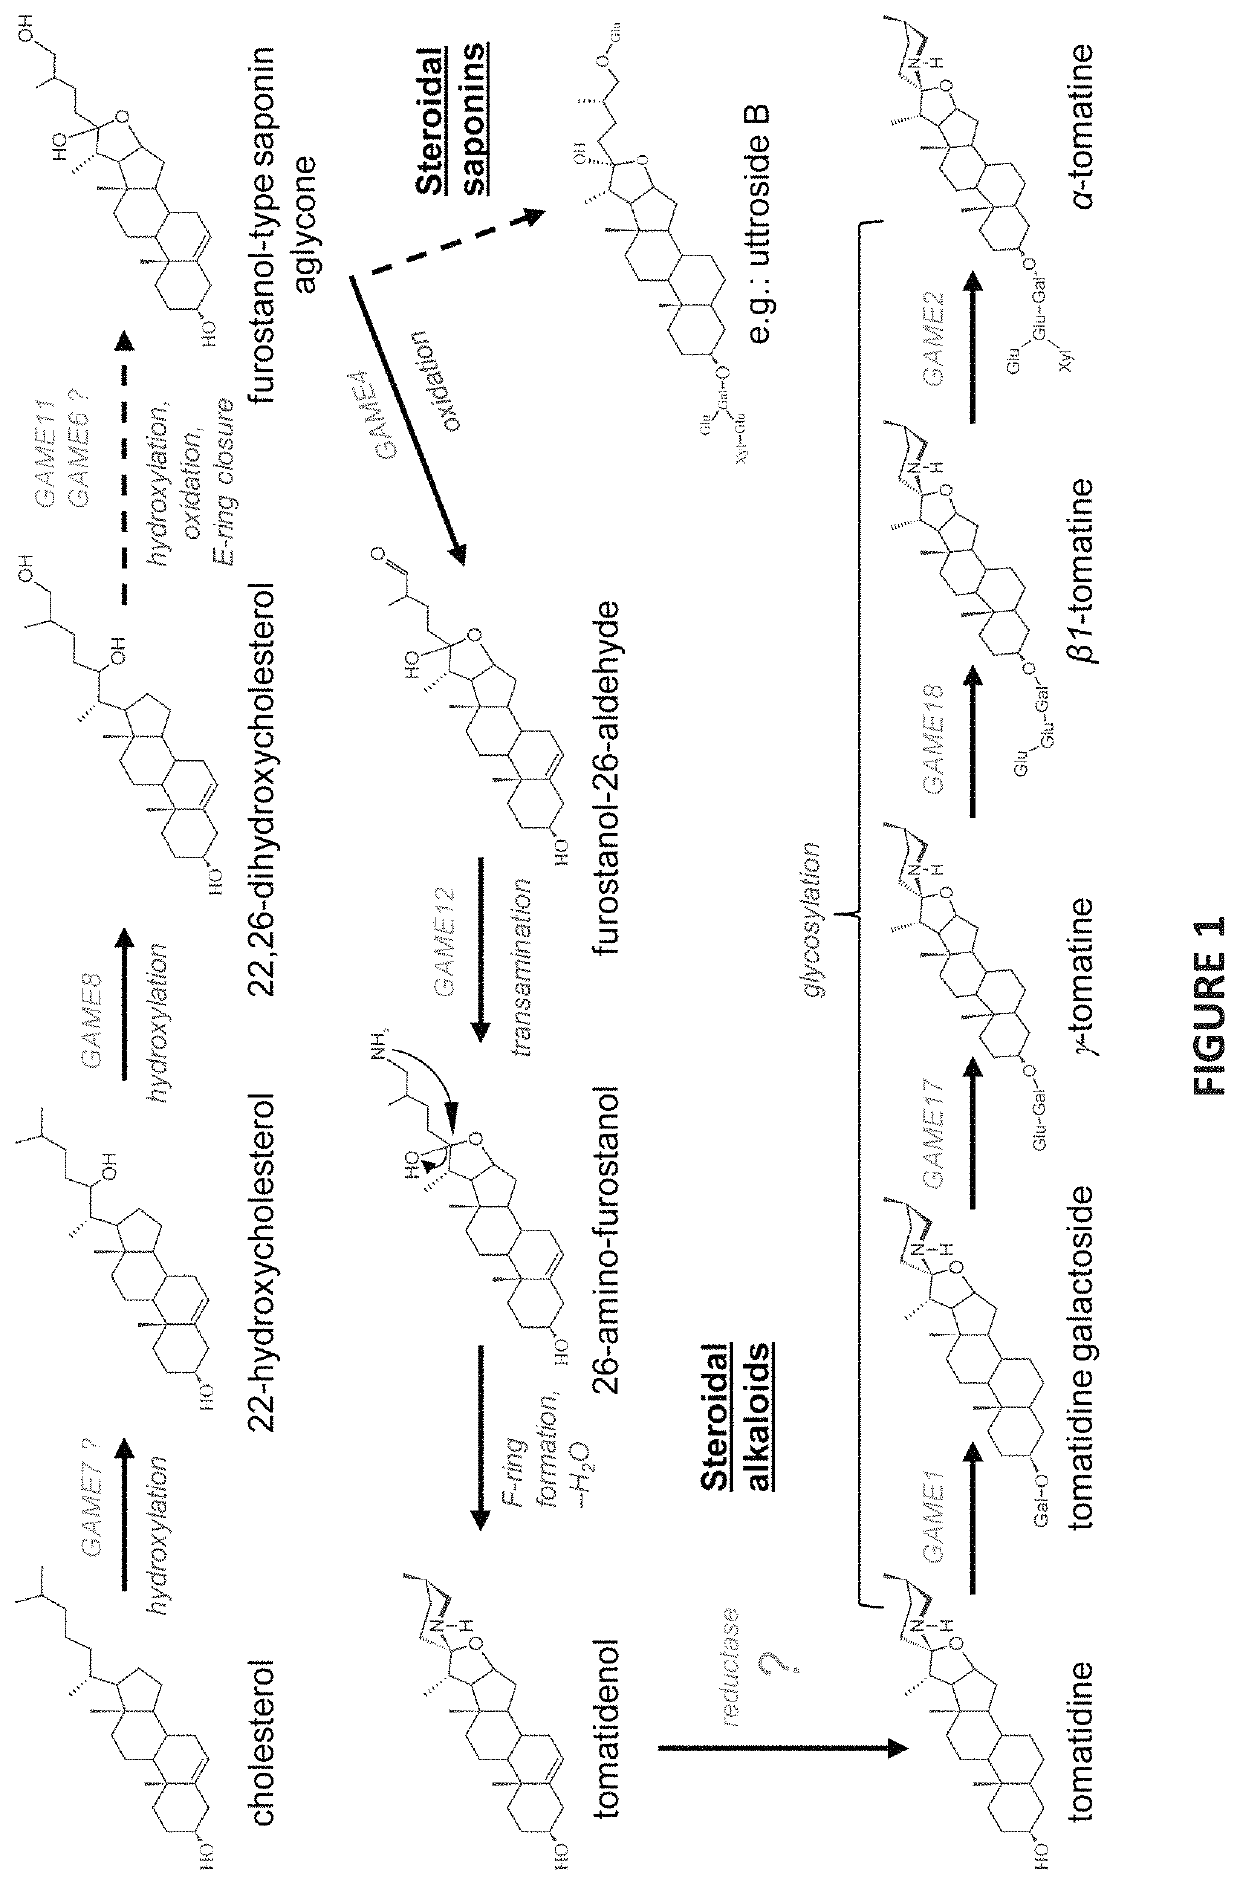 Plant with altered content of steroidal alkaloids